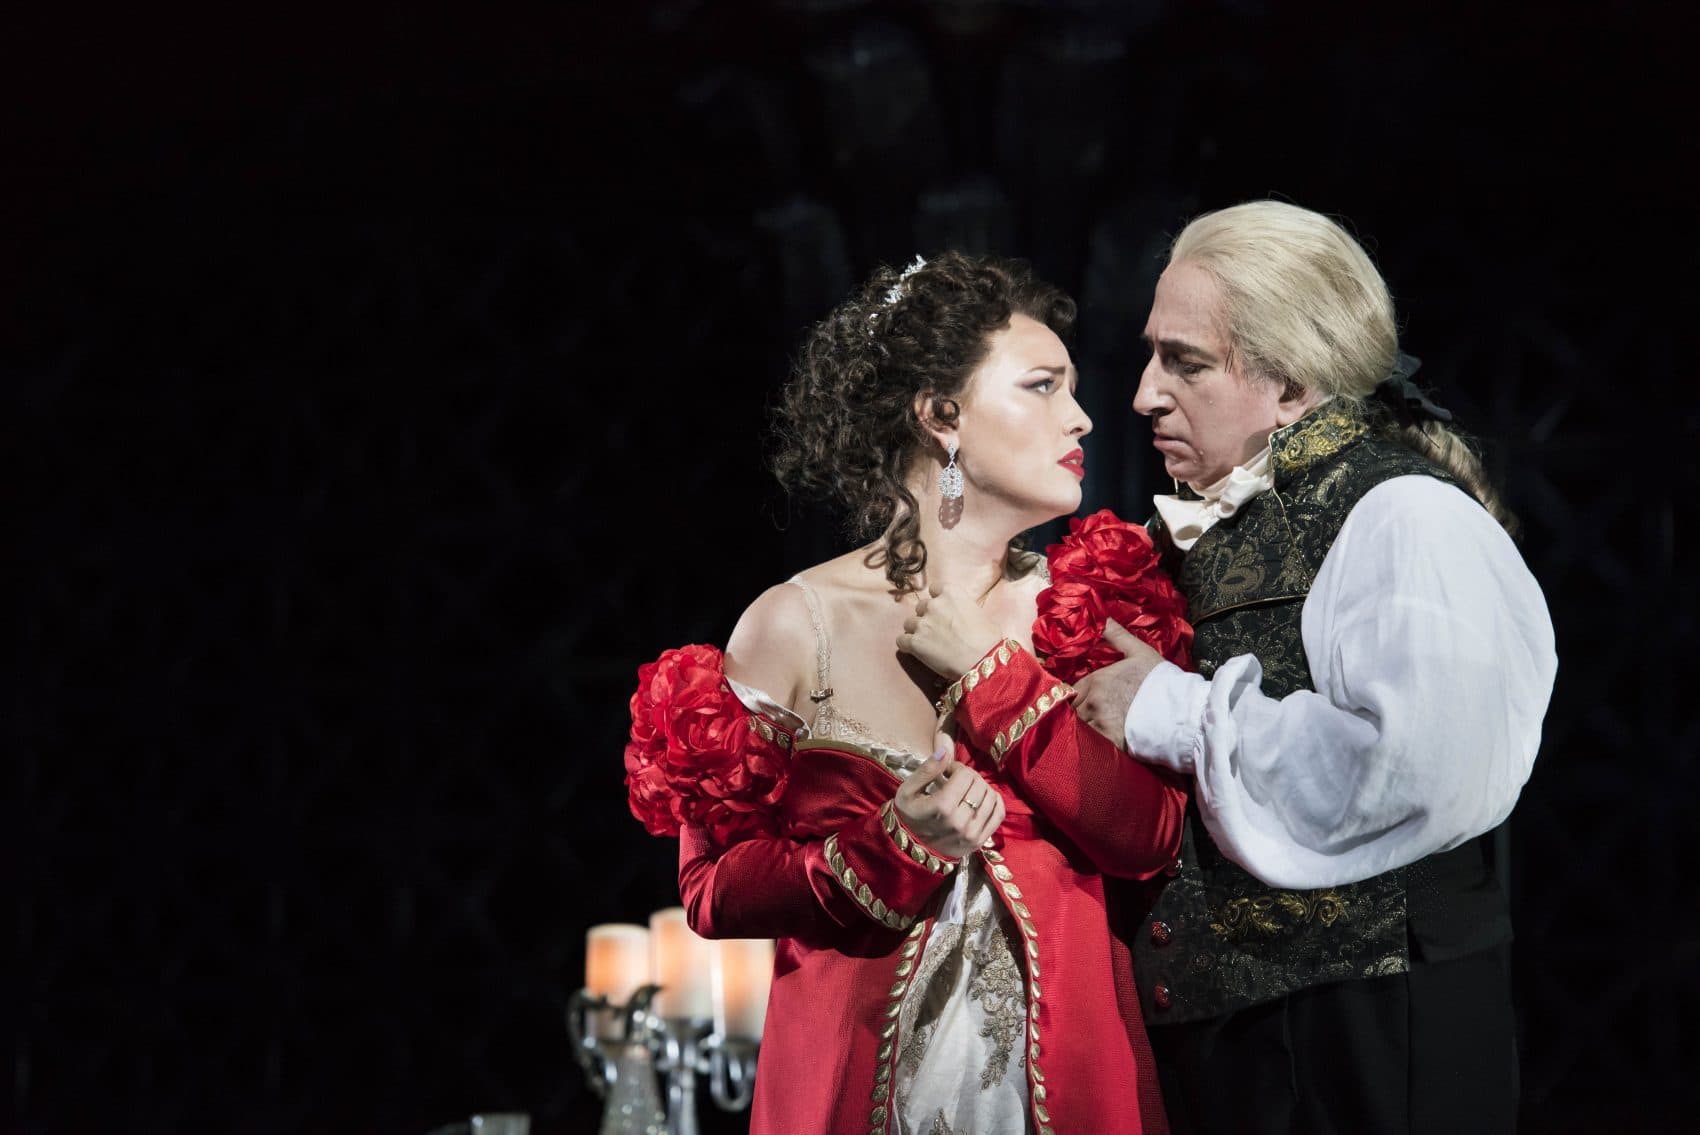 Tosca, portrayed by Elena Stikhina, submits to Scarpia, played by Daniel Sutin, to save the life of her true love in the Boston Lyric Opera production of &quot;Tosca.&quot; (Courtesy Liza Voll/Boston Lyric Opera)